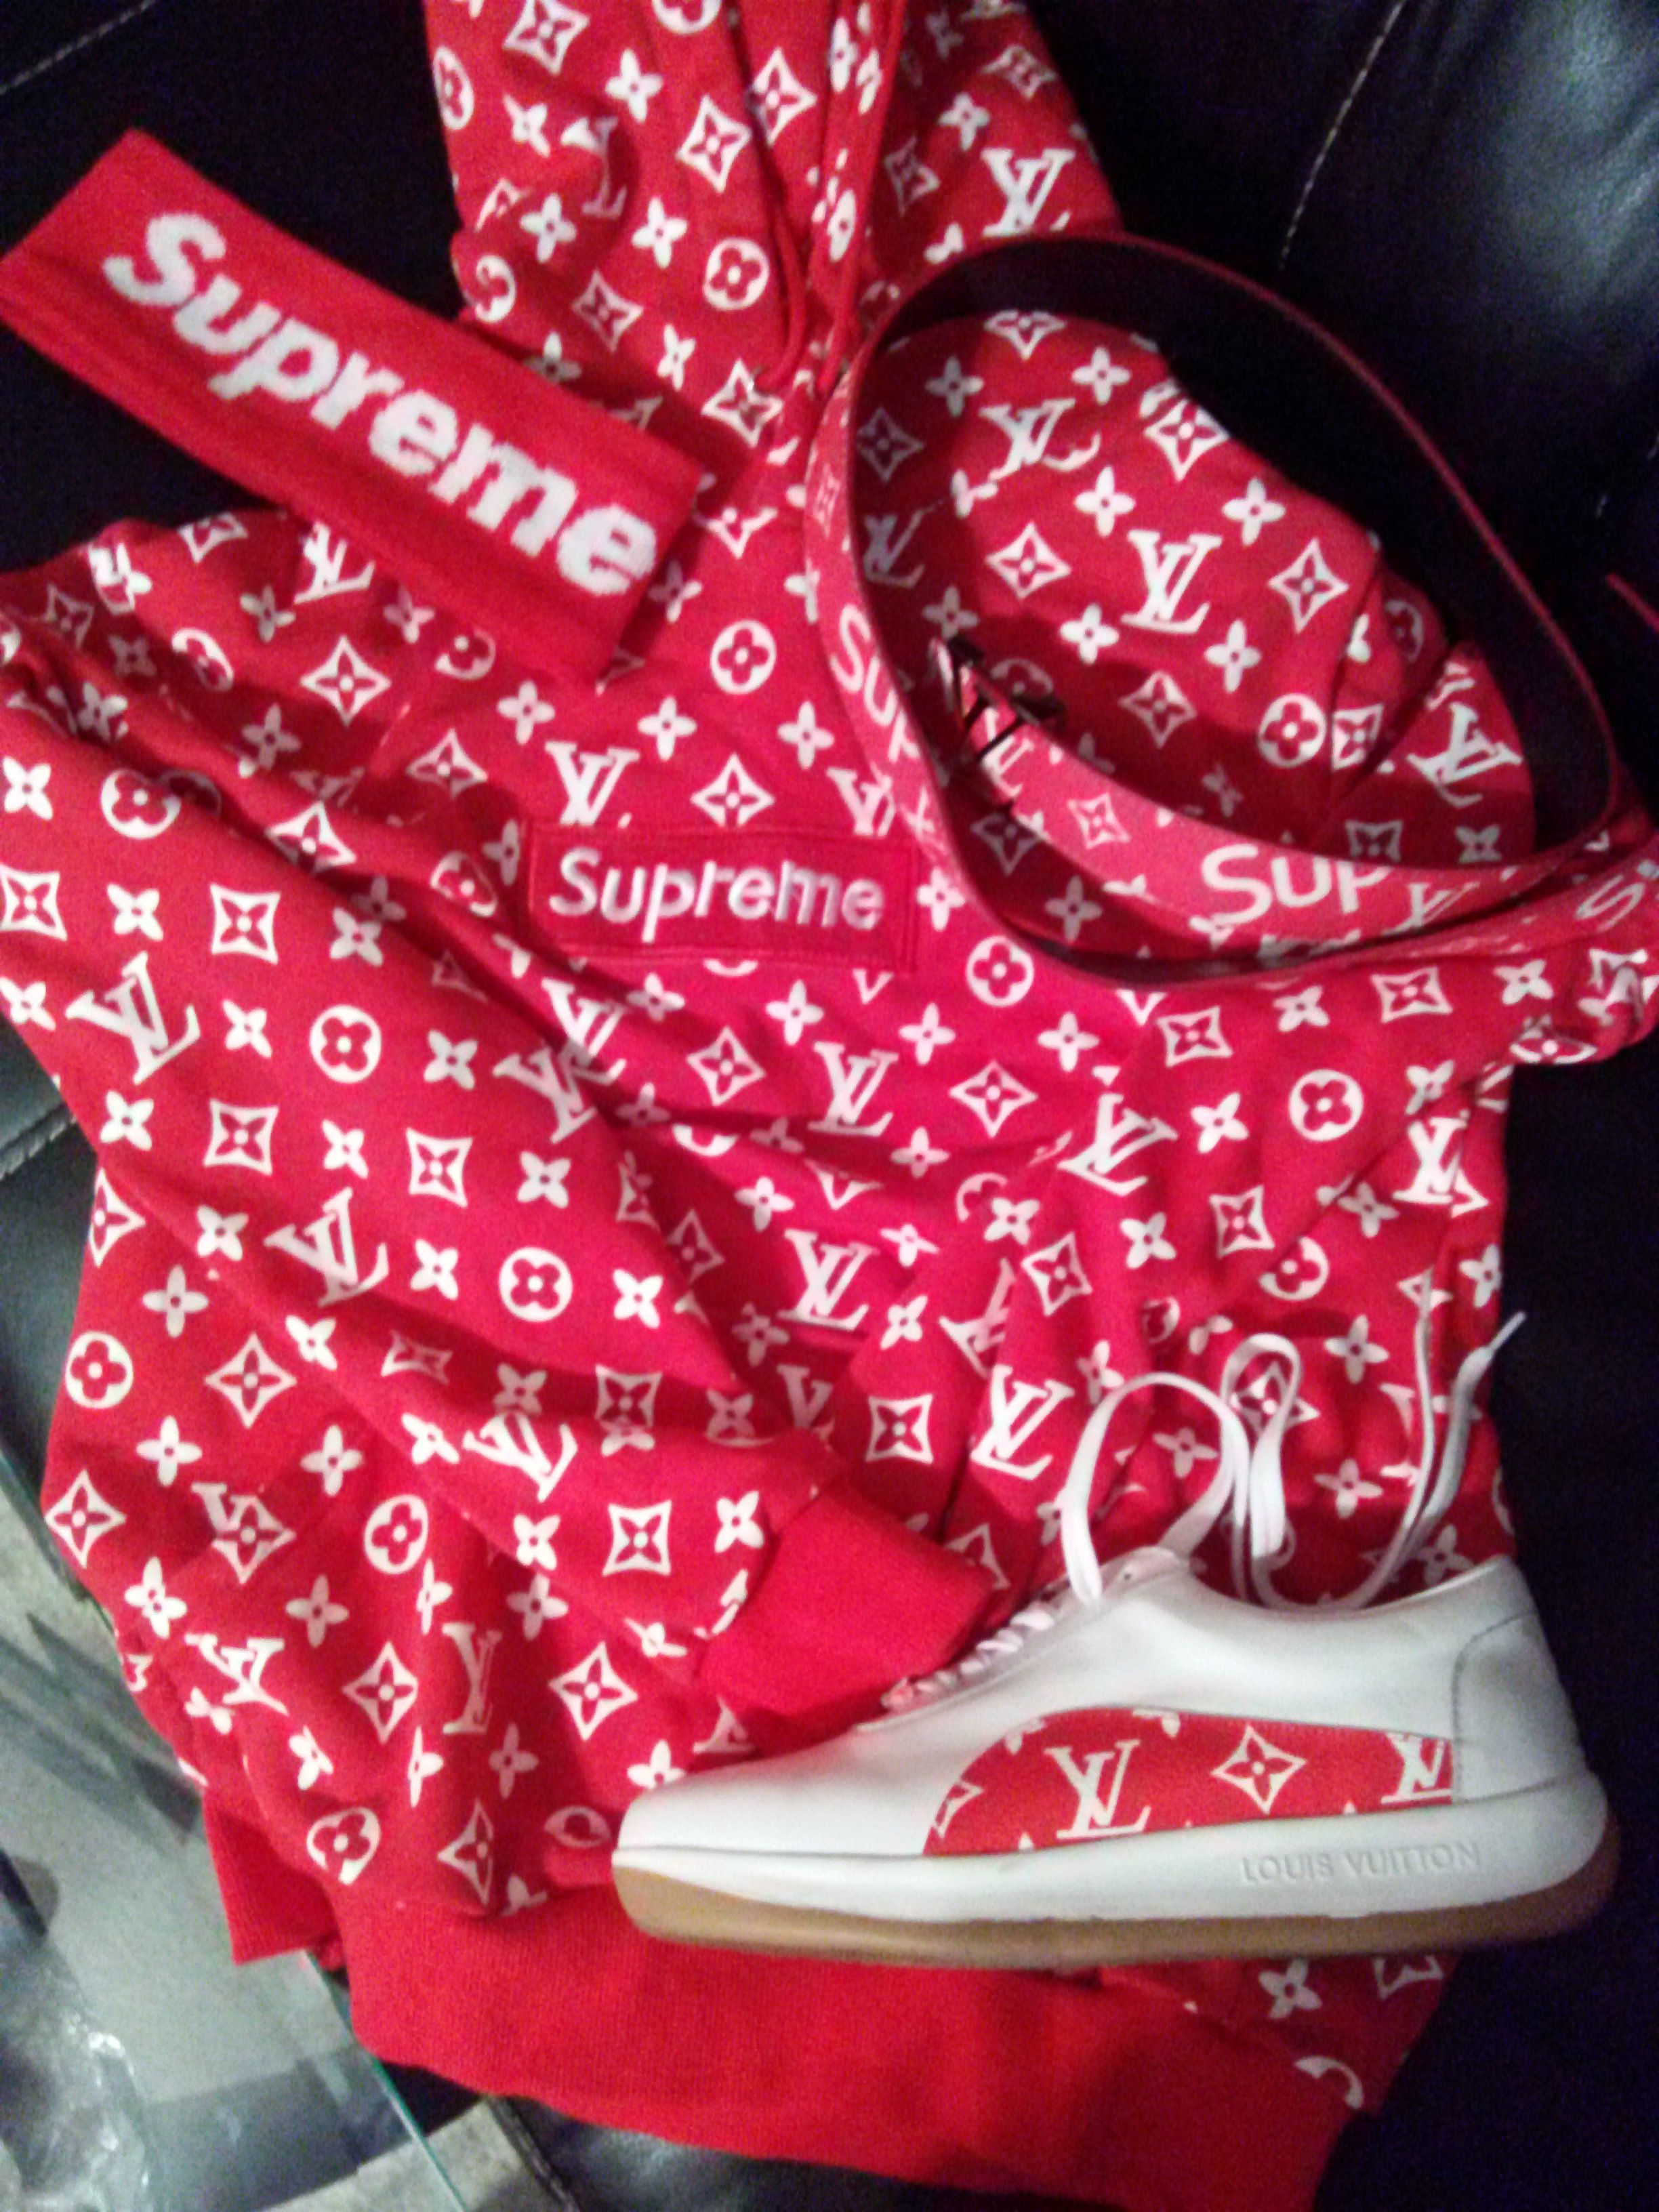 Lv supreme hoodie belt headband and shoes for Sale in Fort Lauderdale, FL -  OfferUp